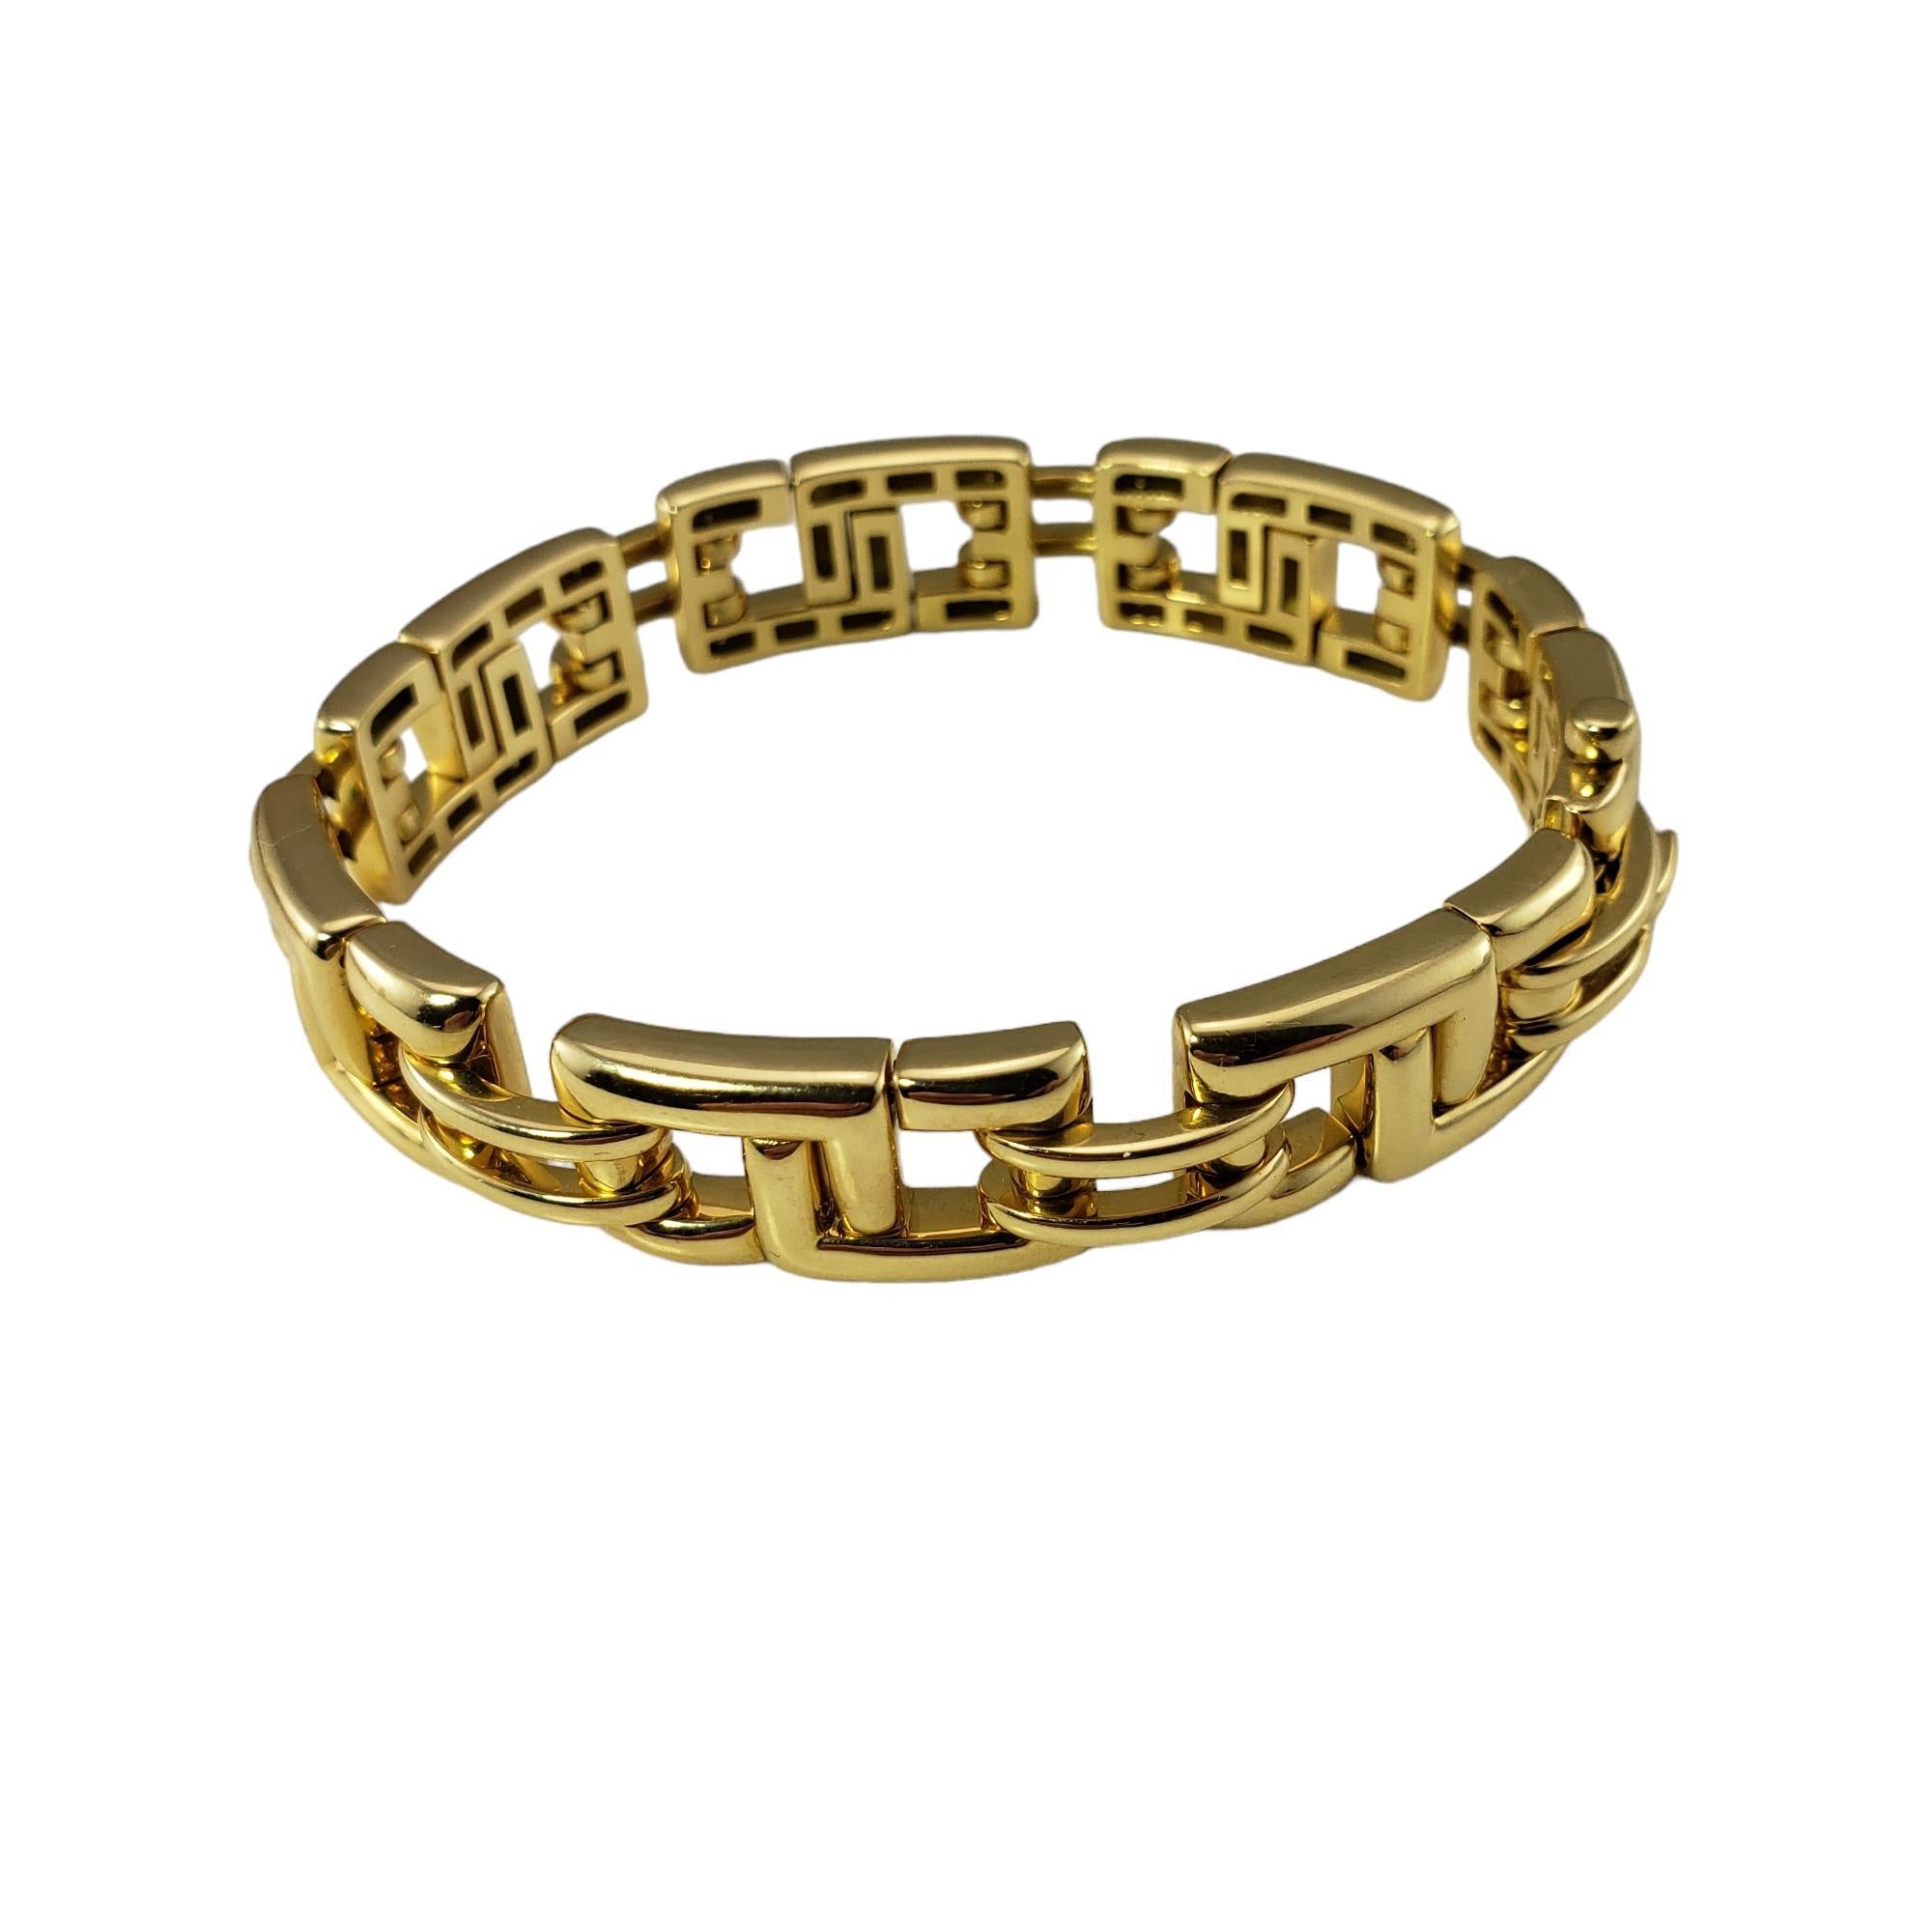 Vintage Tiffany & Co. 18K Yellow Gold Biscayne Bracelet-

This elegant link bracelet by Tiffany & Co. is crafted in beautifully detailed 18K yellow gold. Pull pin closure.

Width: 13 mm.

Size: 7.5 inches end to end

Bracelet size: 7